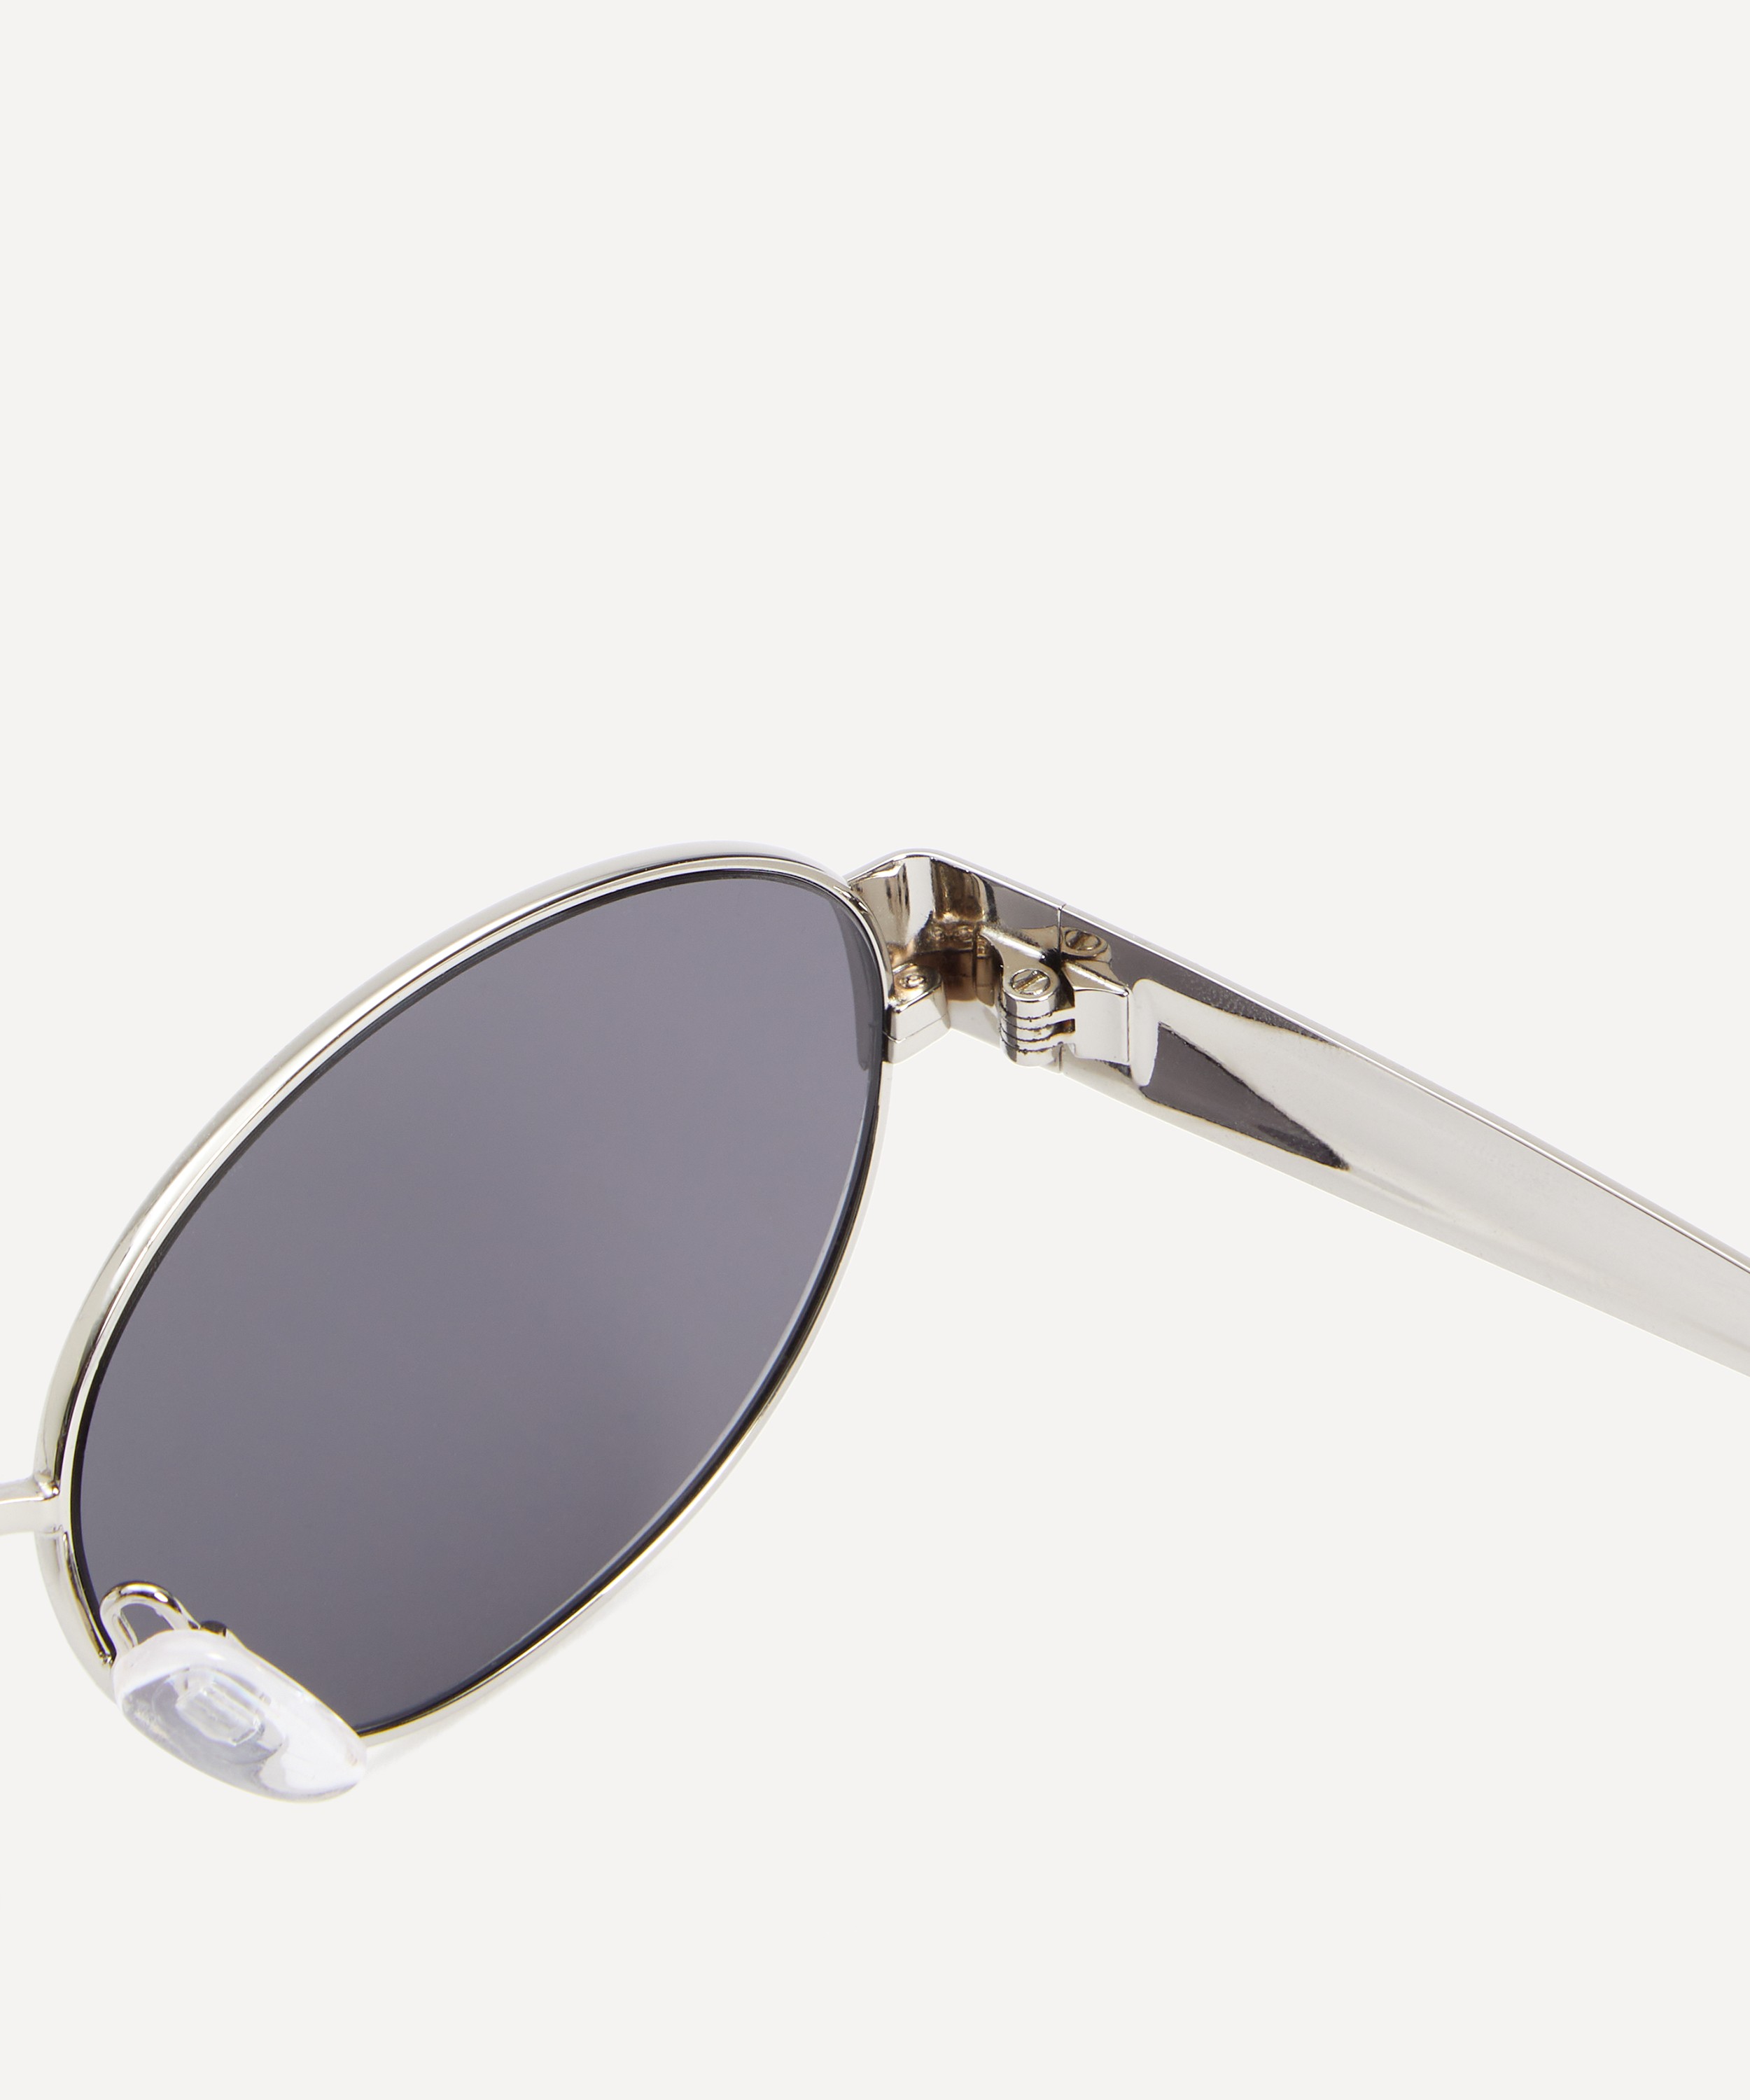 Liberty - Oval Sunglasses image number 3